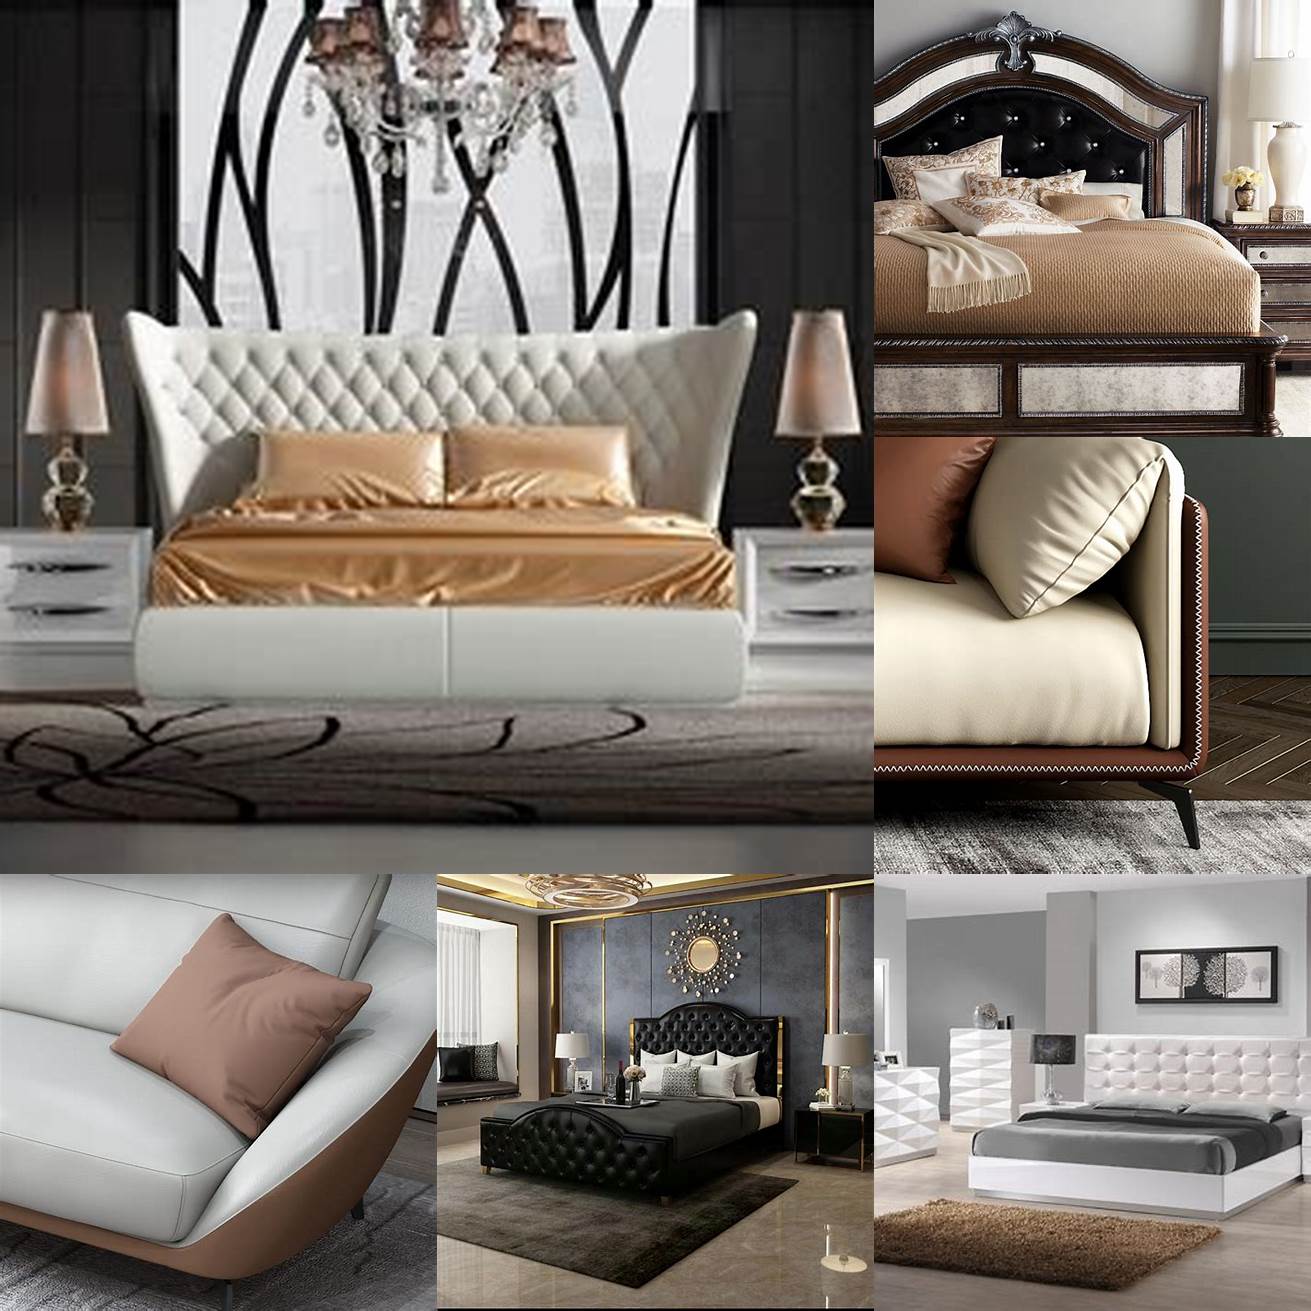 Leather - Leather upholstery is durable and stylish and adds a touch of luxury to any bedroom